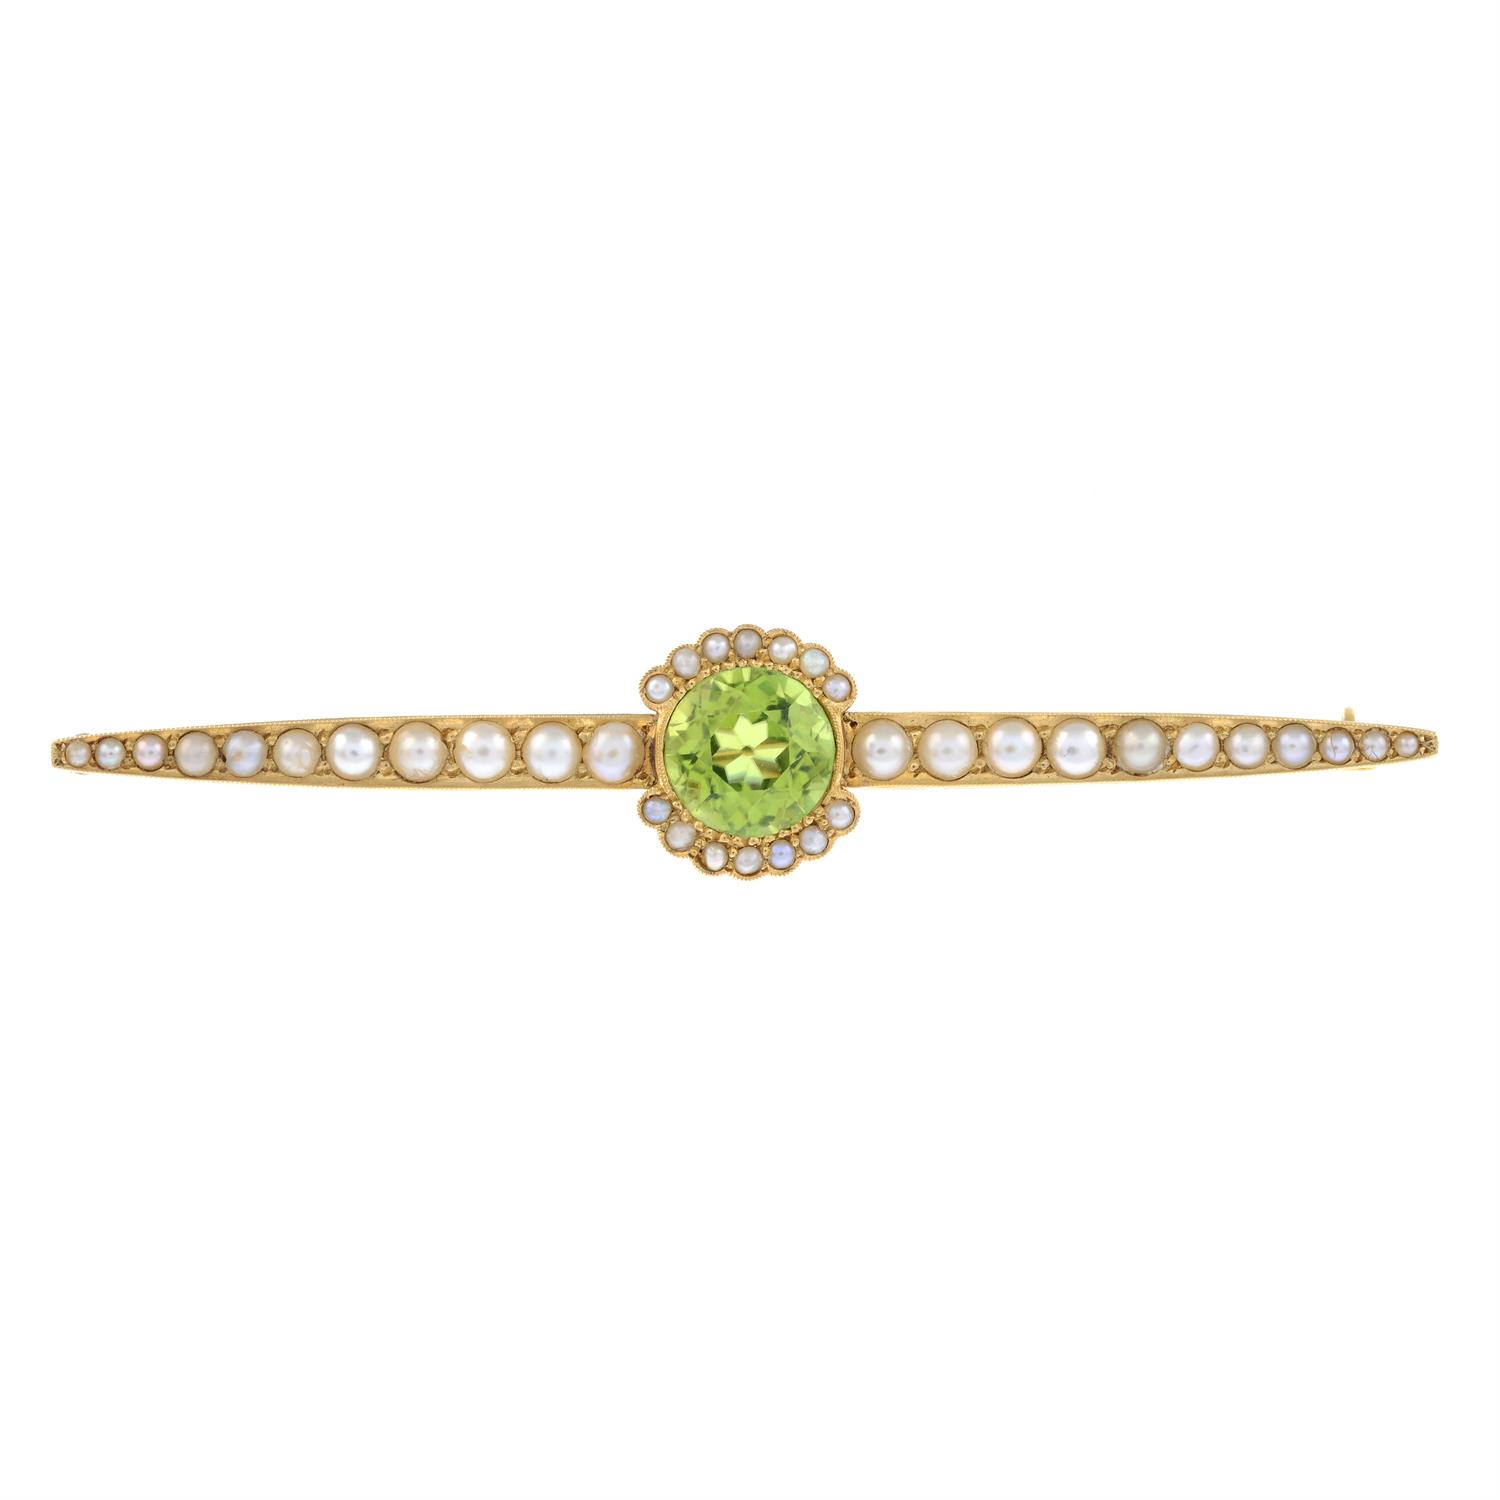 Early 20th century 15ct gold peridot and split pearl brooch - Image 2 of 4